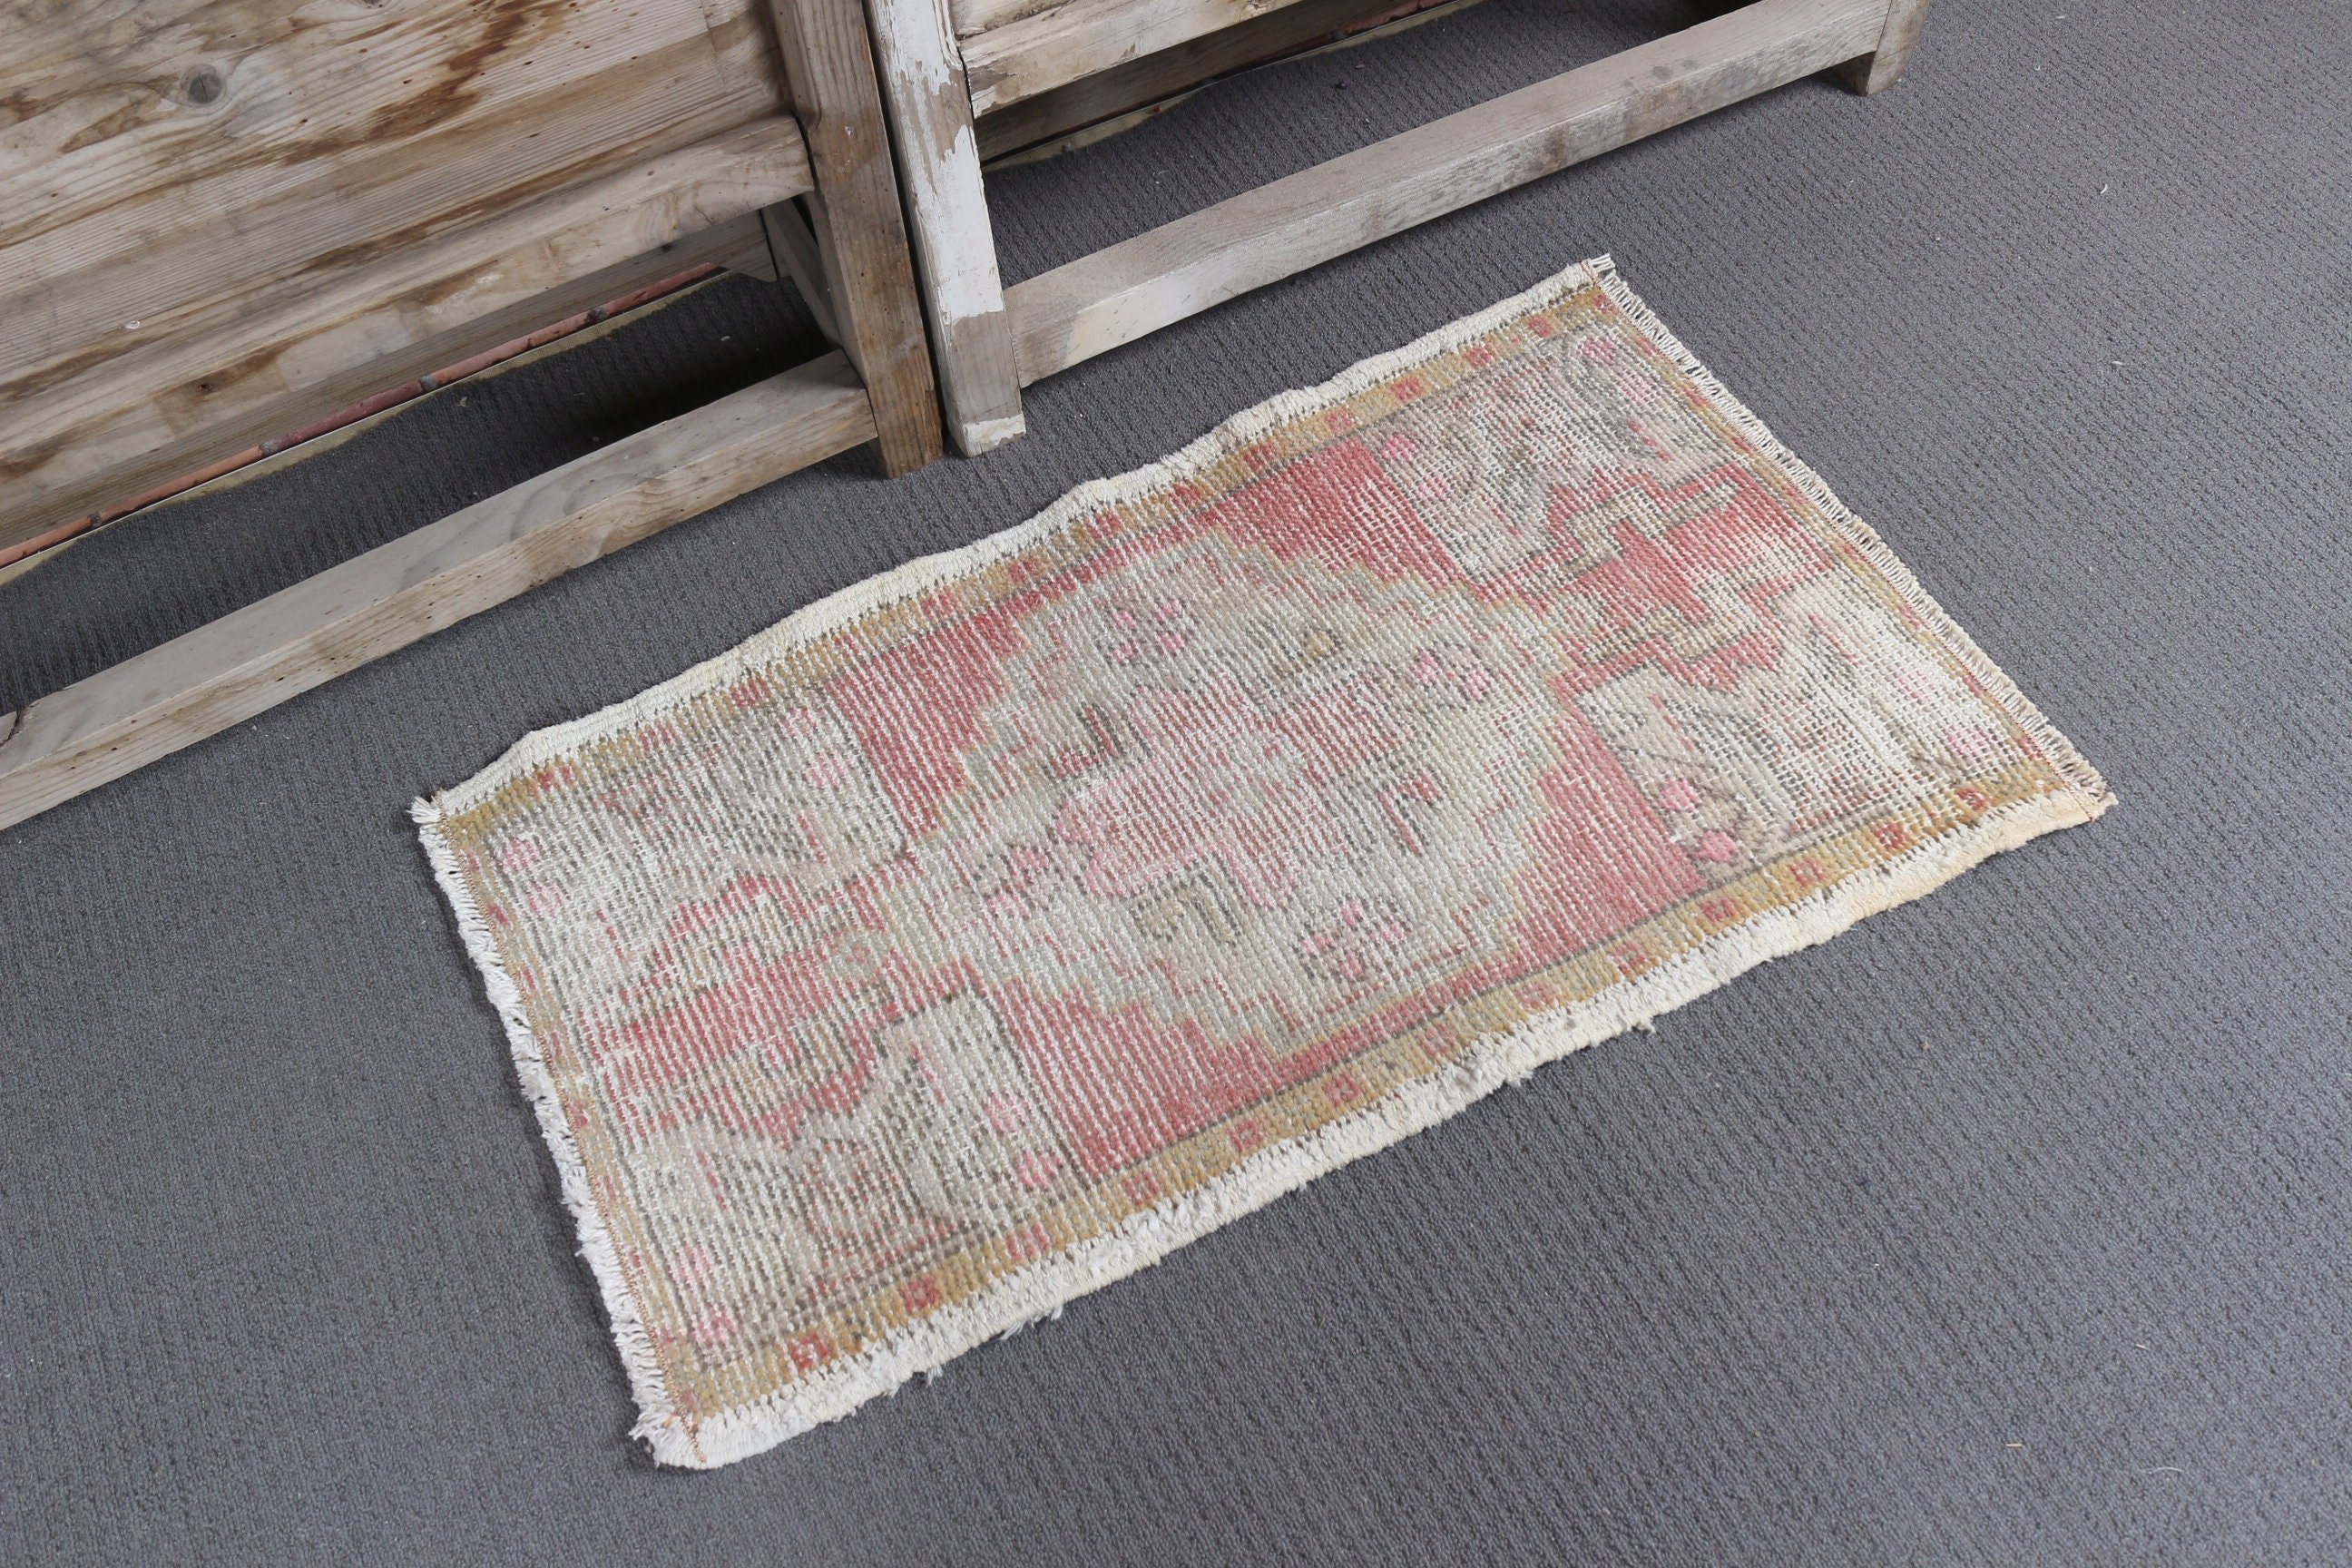 Turkish Rug, Pink Kitchen Rugs, Car Mat Rugs, Rugs for Entry, Vintage Rugs, Door Mat Rug, Oriental Rug, Kitchen Rug, 1.5x2.8 ft Small Rugs